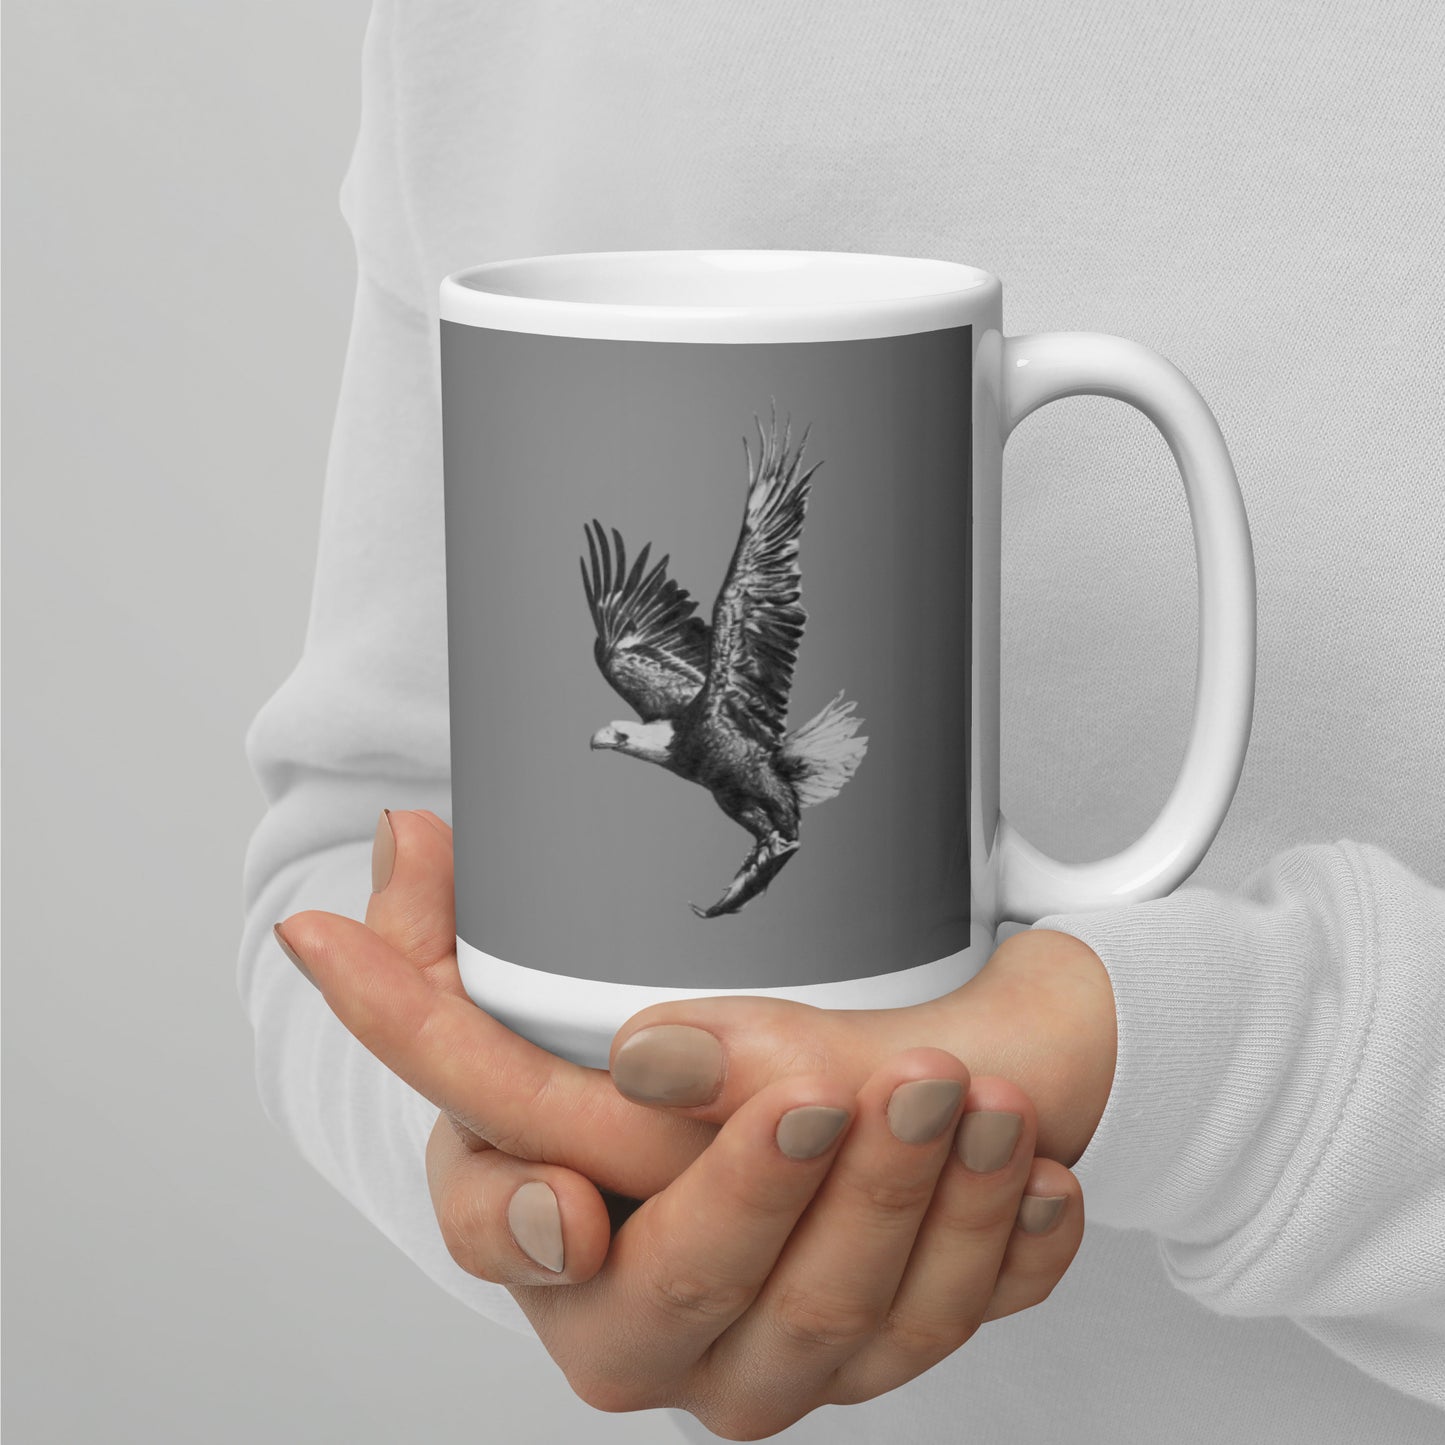 This "Eagle White Glossy Mug" is from a drawing of mine created with a graphite pencil. It has been digitally optimized and transferred to a 15oz white glossy mug.